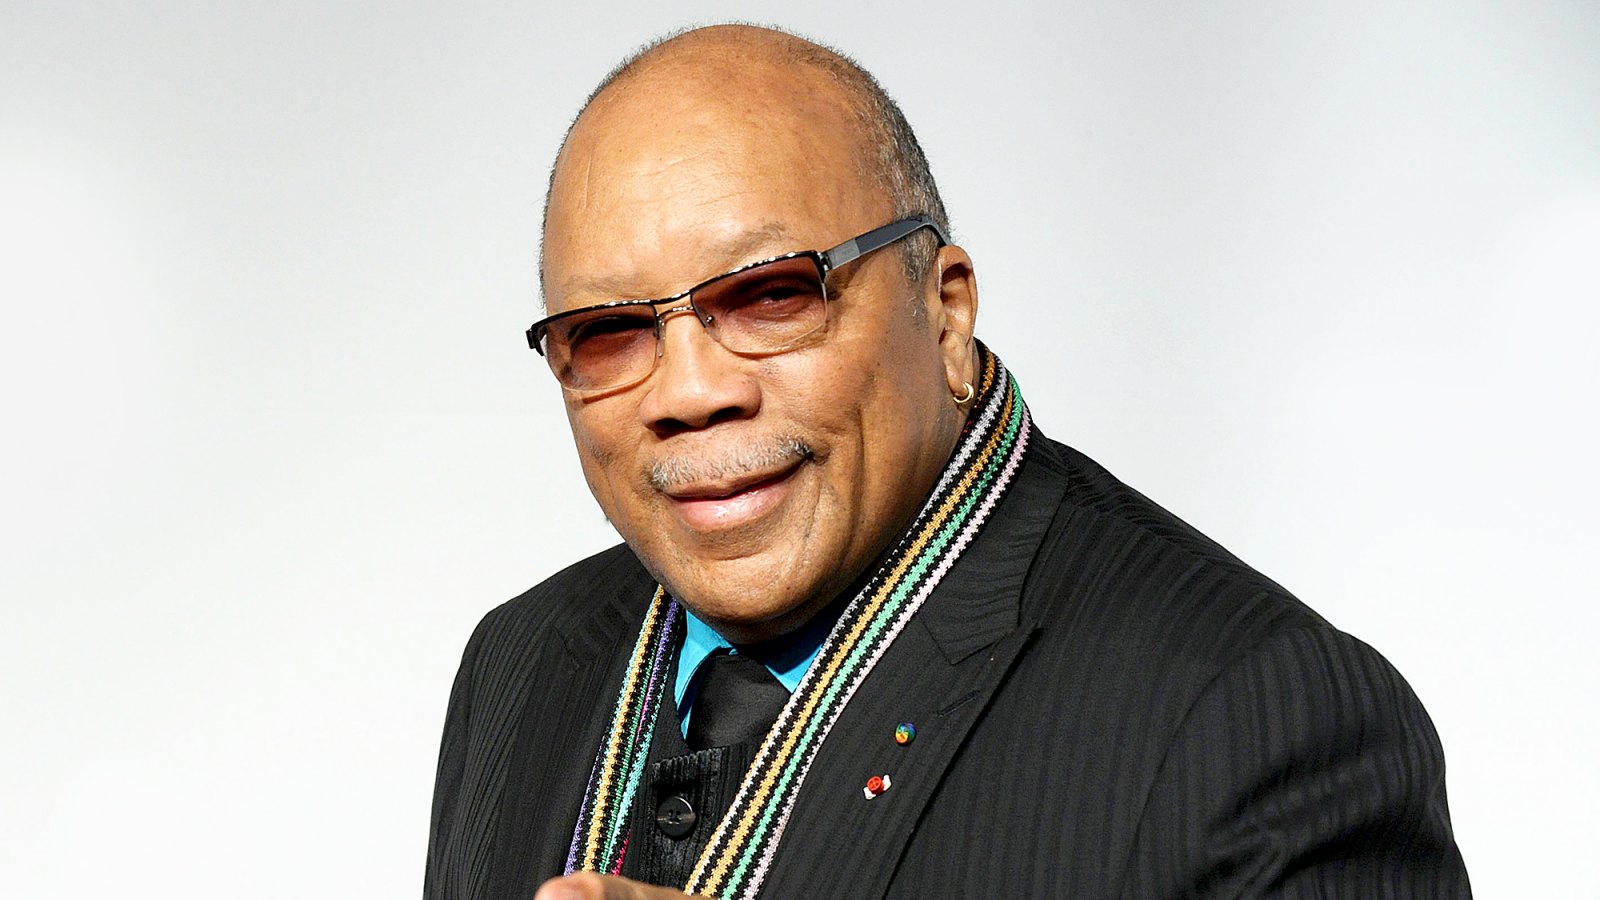 Quincy Jones attends the MusiCares Person of the Year at Los Angeles Convention Center in Los Angeles, California.